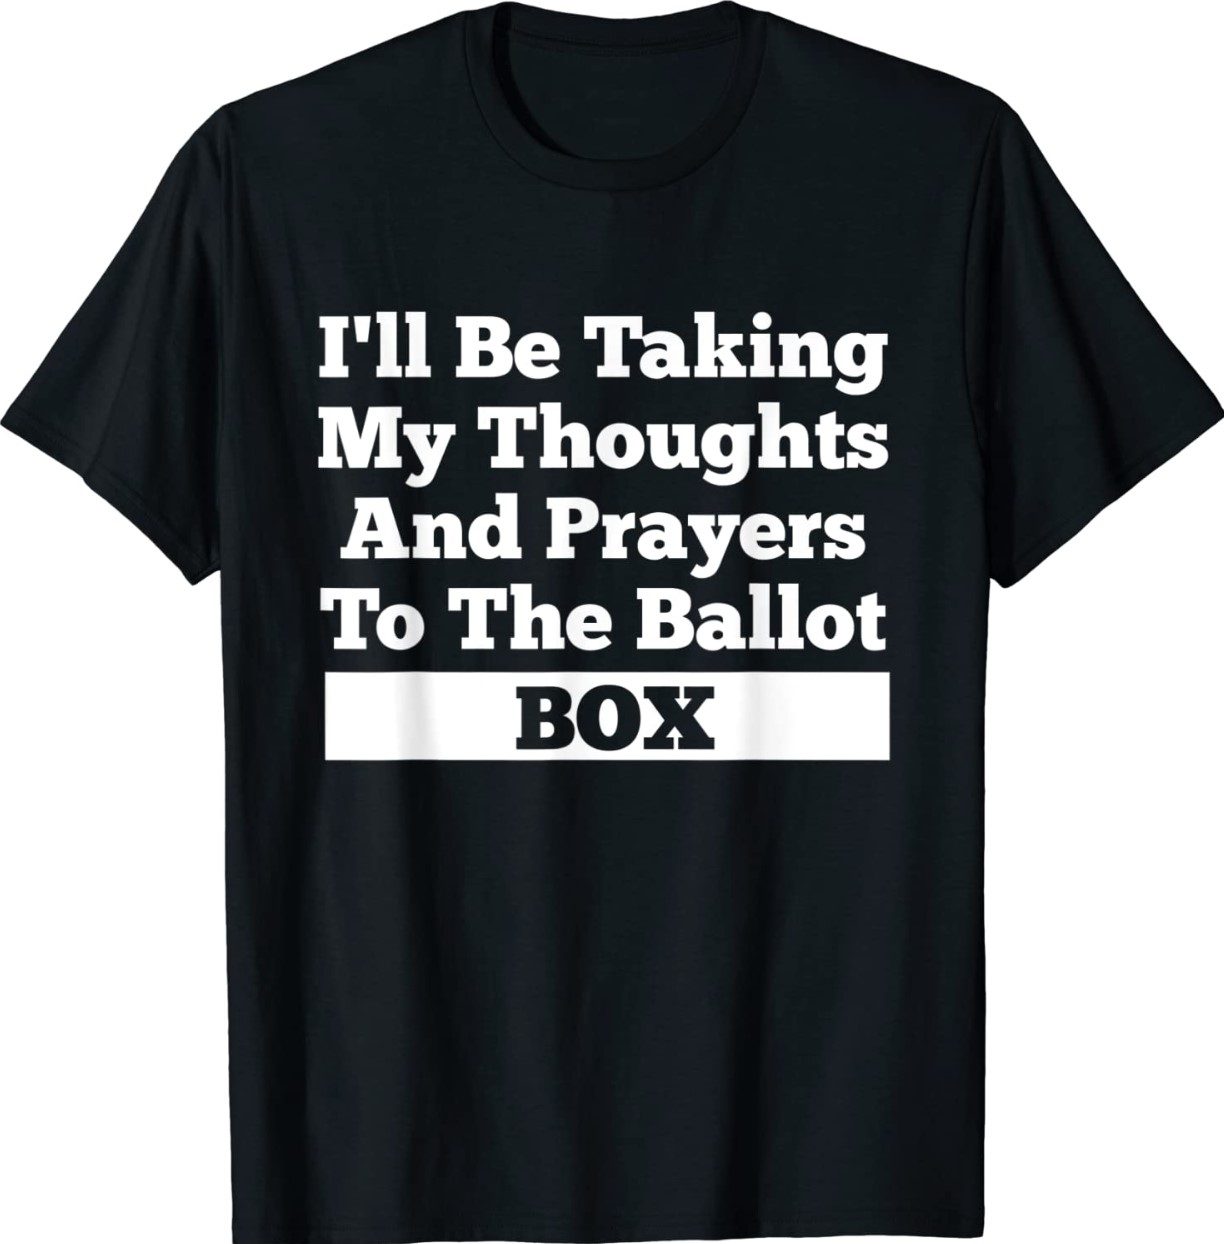 I'll Be Taking My Thoughts And Prayer To The Ballot Box Shirt ...